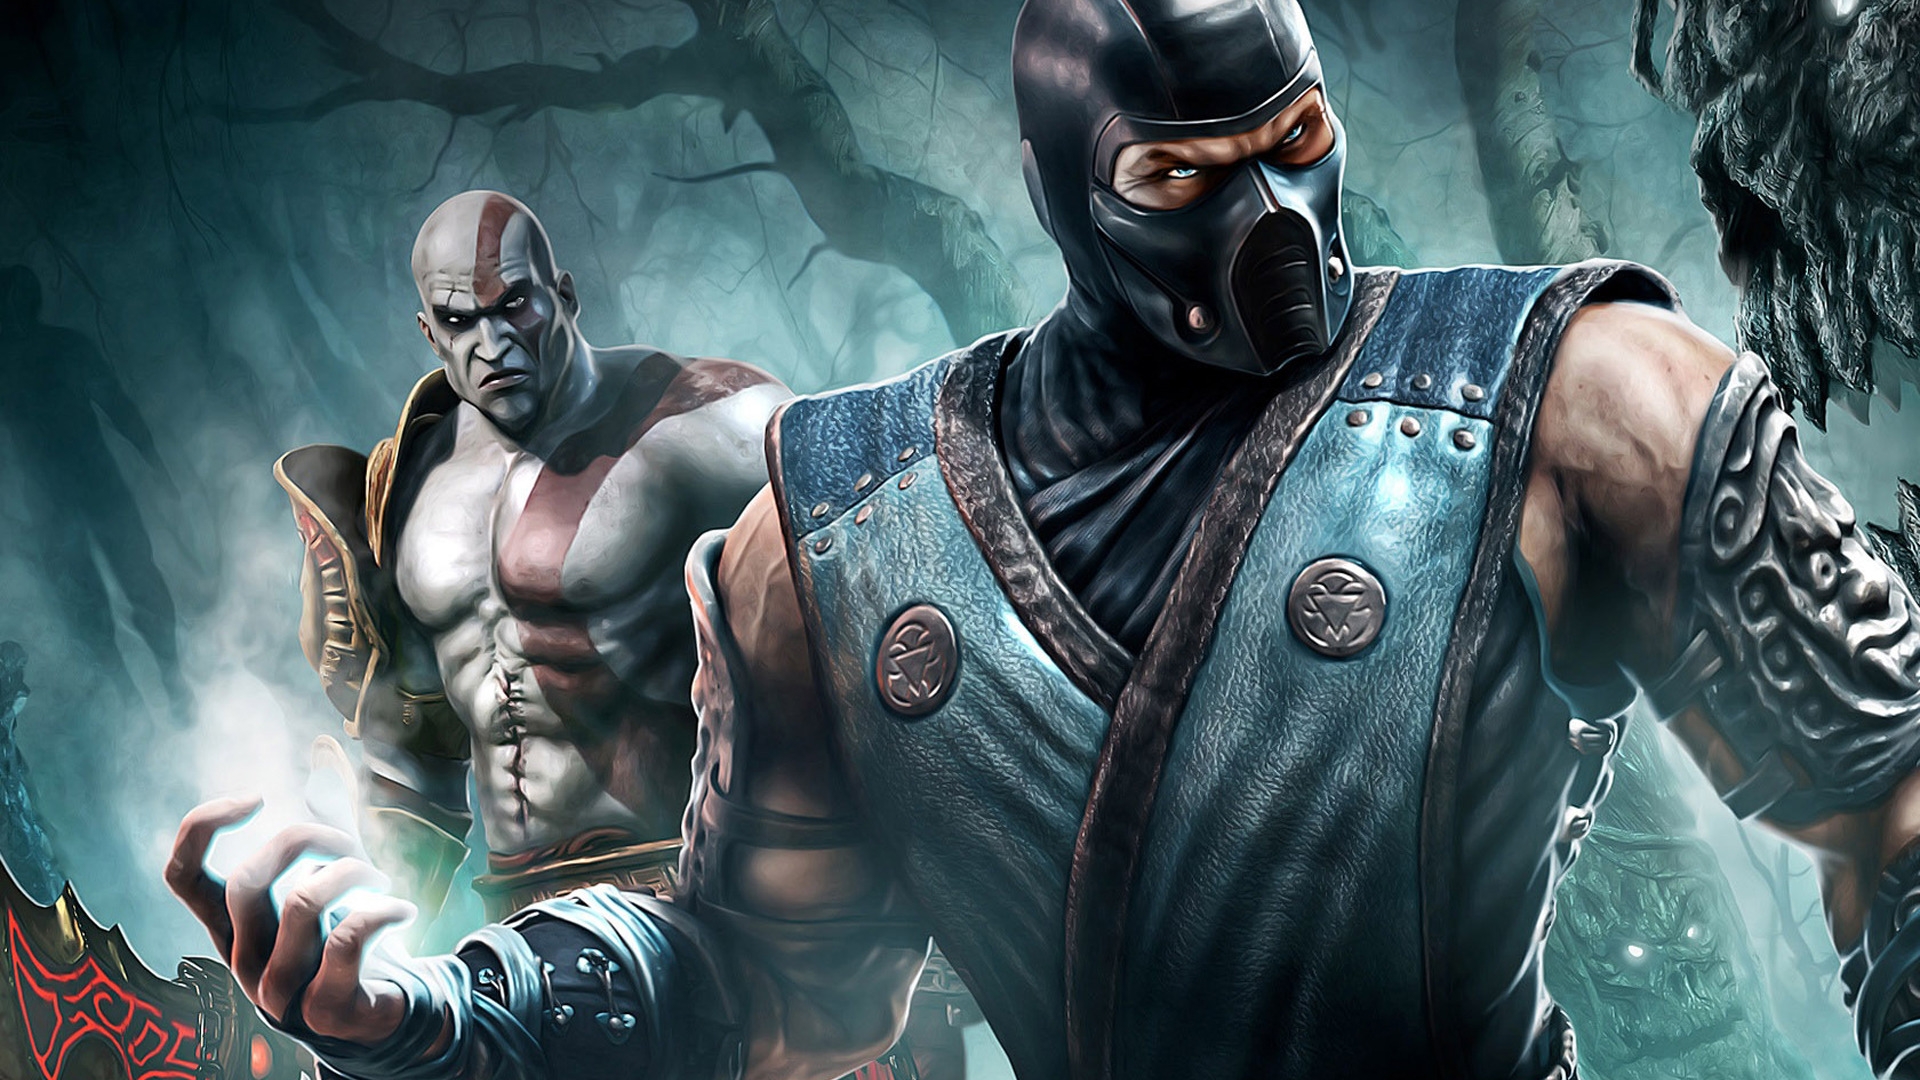 Mortal Kombat Characters for 1920 x 1080 HDTV 1080p resolution